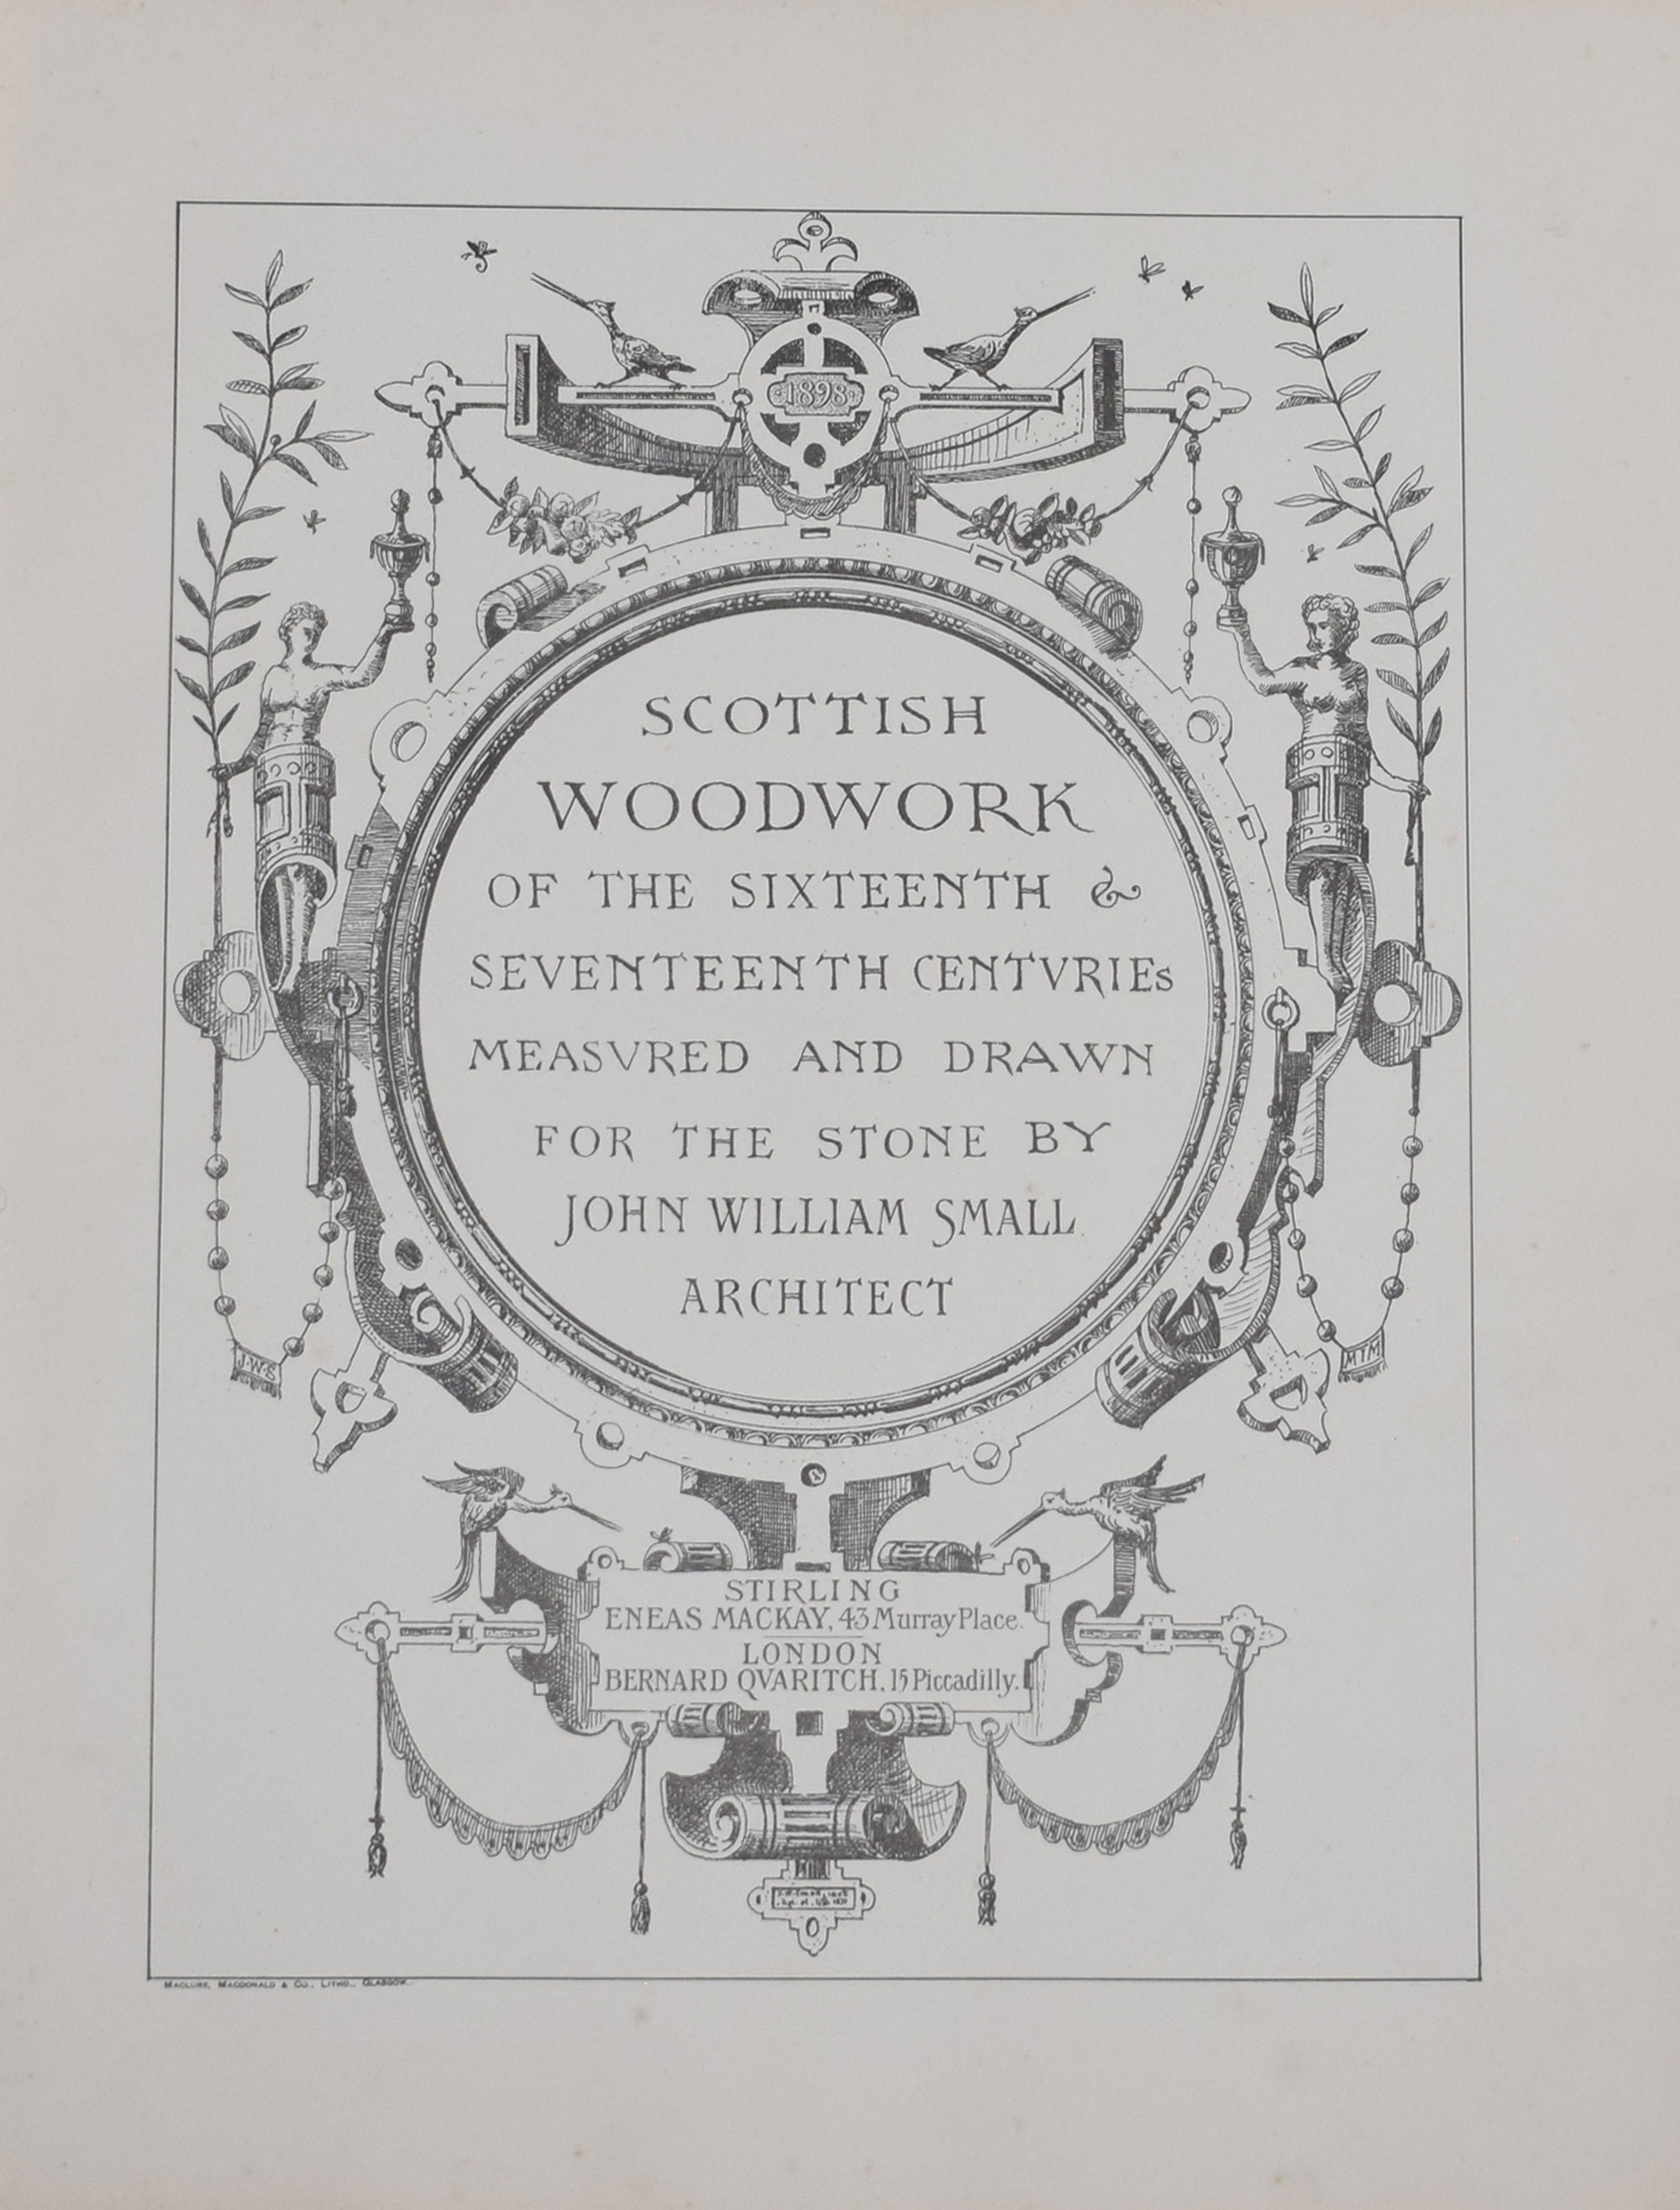 Scottish Woodwork of the Sixteenth & Seventeenth Centuries. Limited edition.